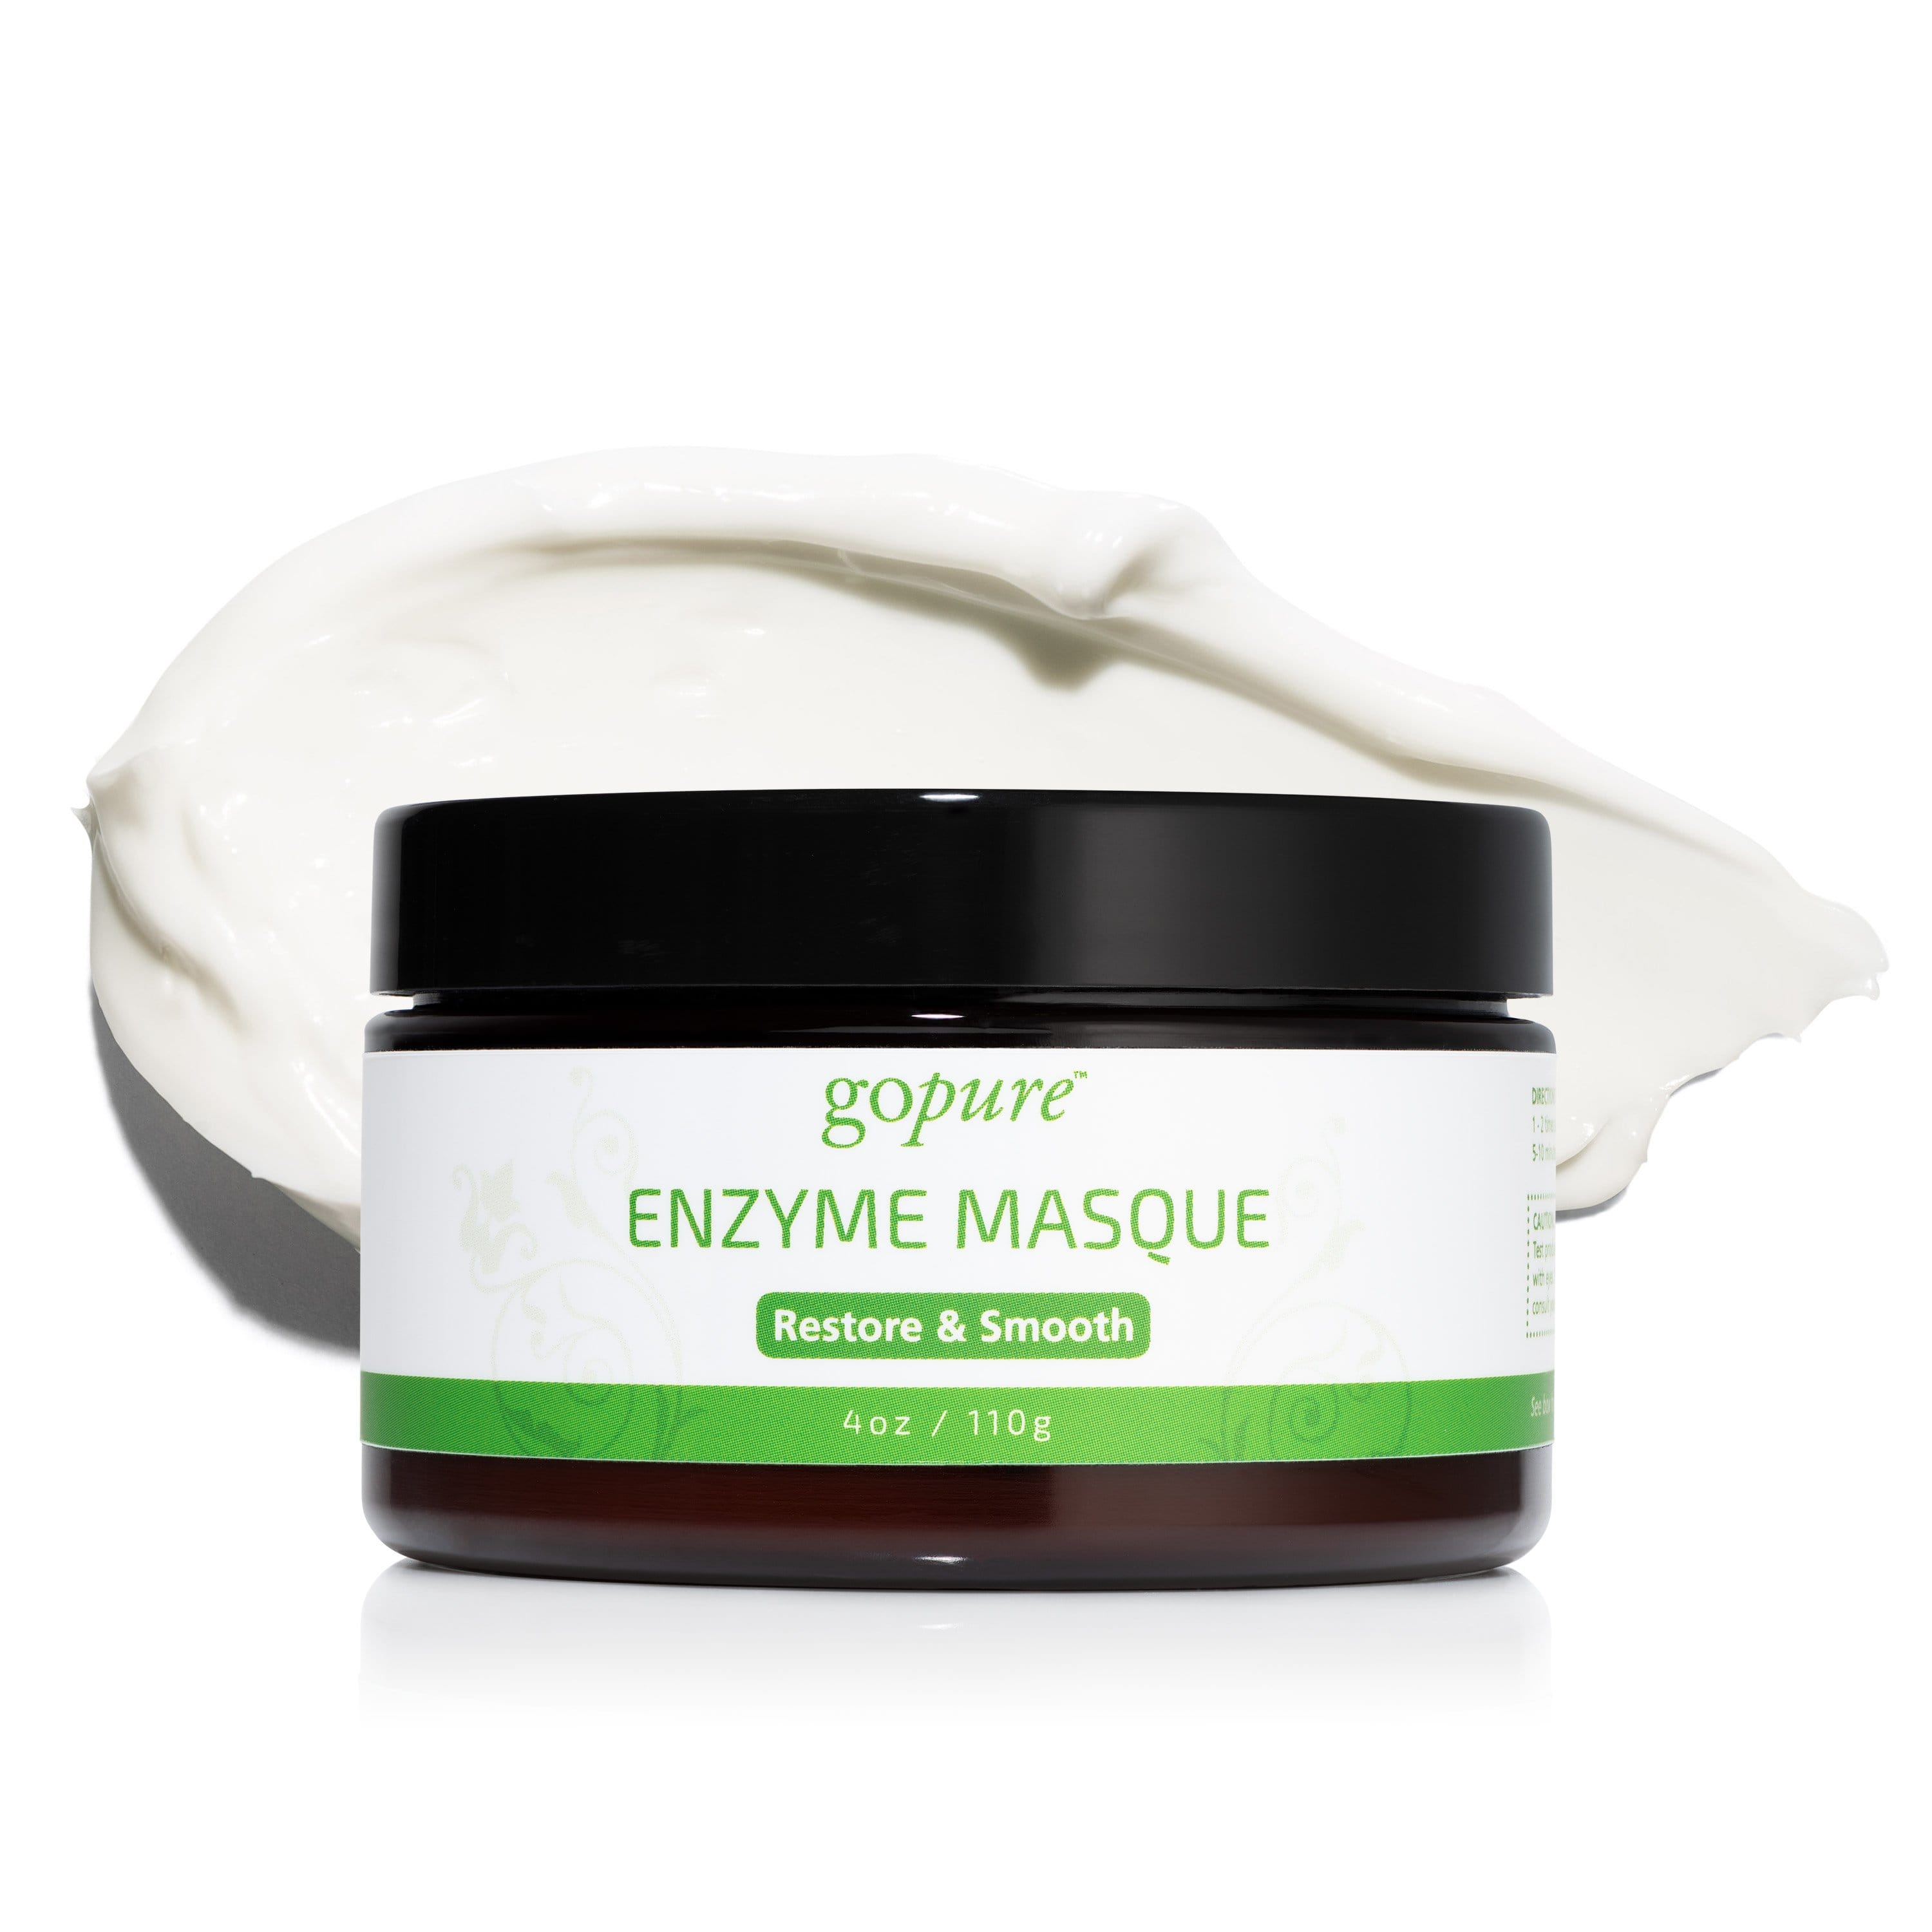 goPure Enzyme Facial Mask - Hydrating & Exfoliating Face Mask Skin Care Pore Minimizer, Improves & Smooths the look of Dull Skin - Natural & Effective Anti Visible Wrinkle Face Mask For Women